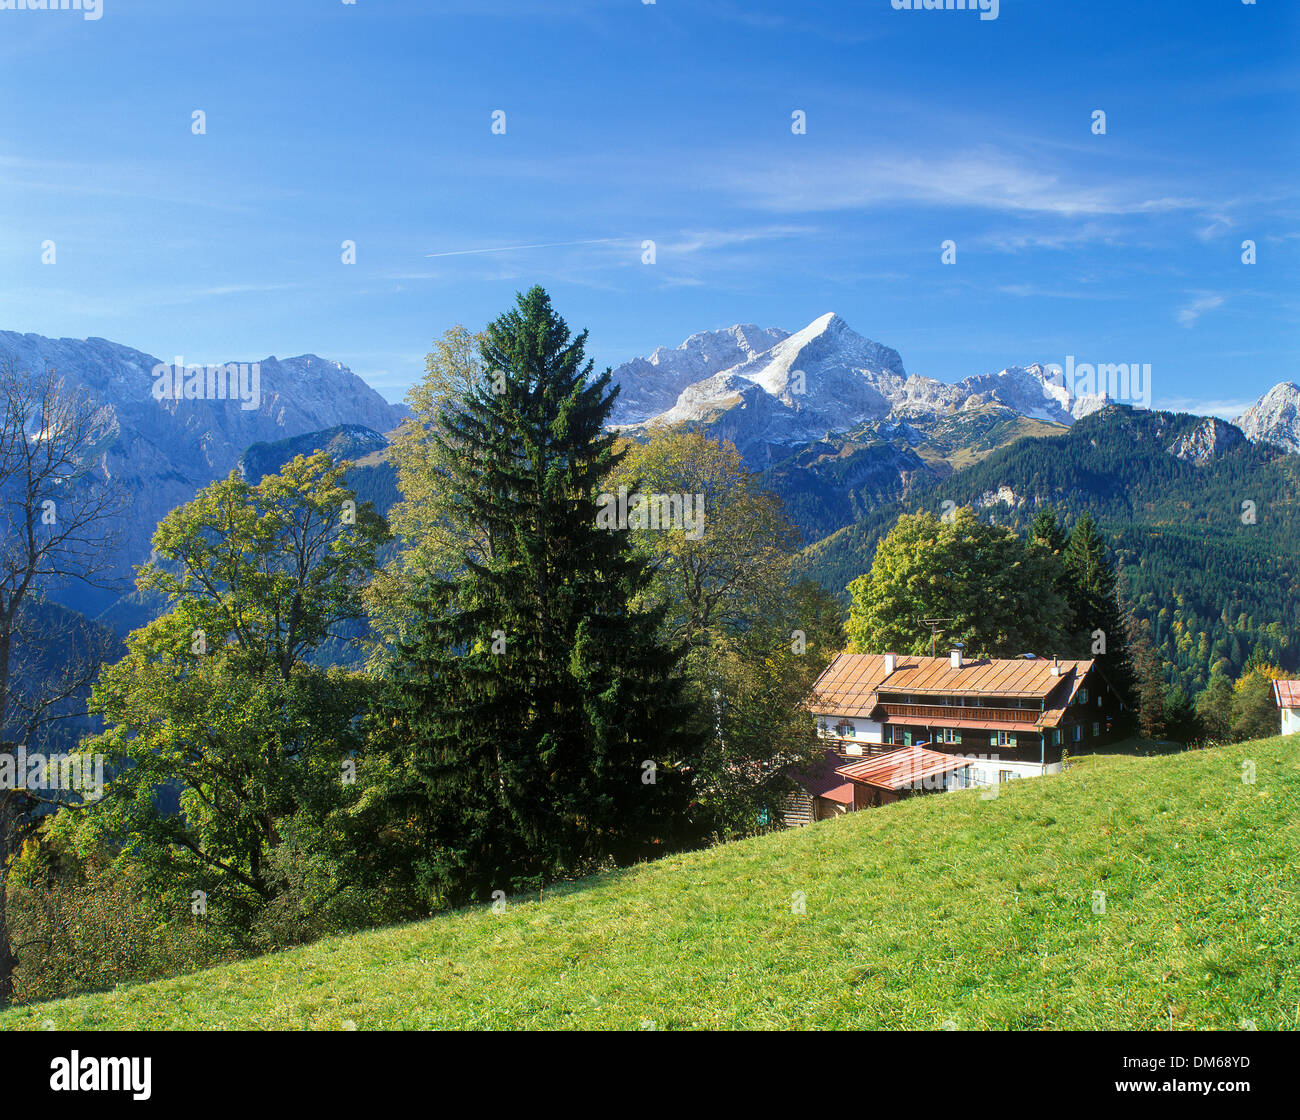 Gasthof Eckbauer guesthouse in front of Alpspitze Mountain, Wetterstein Mountains, Upper Bavaria, Bavaria, Germany Stock Photo